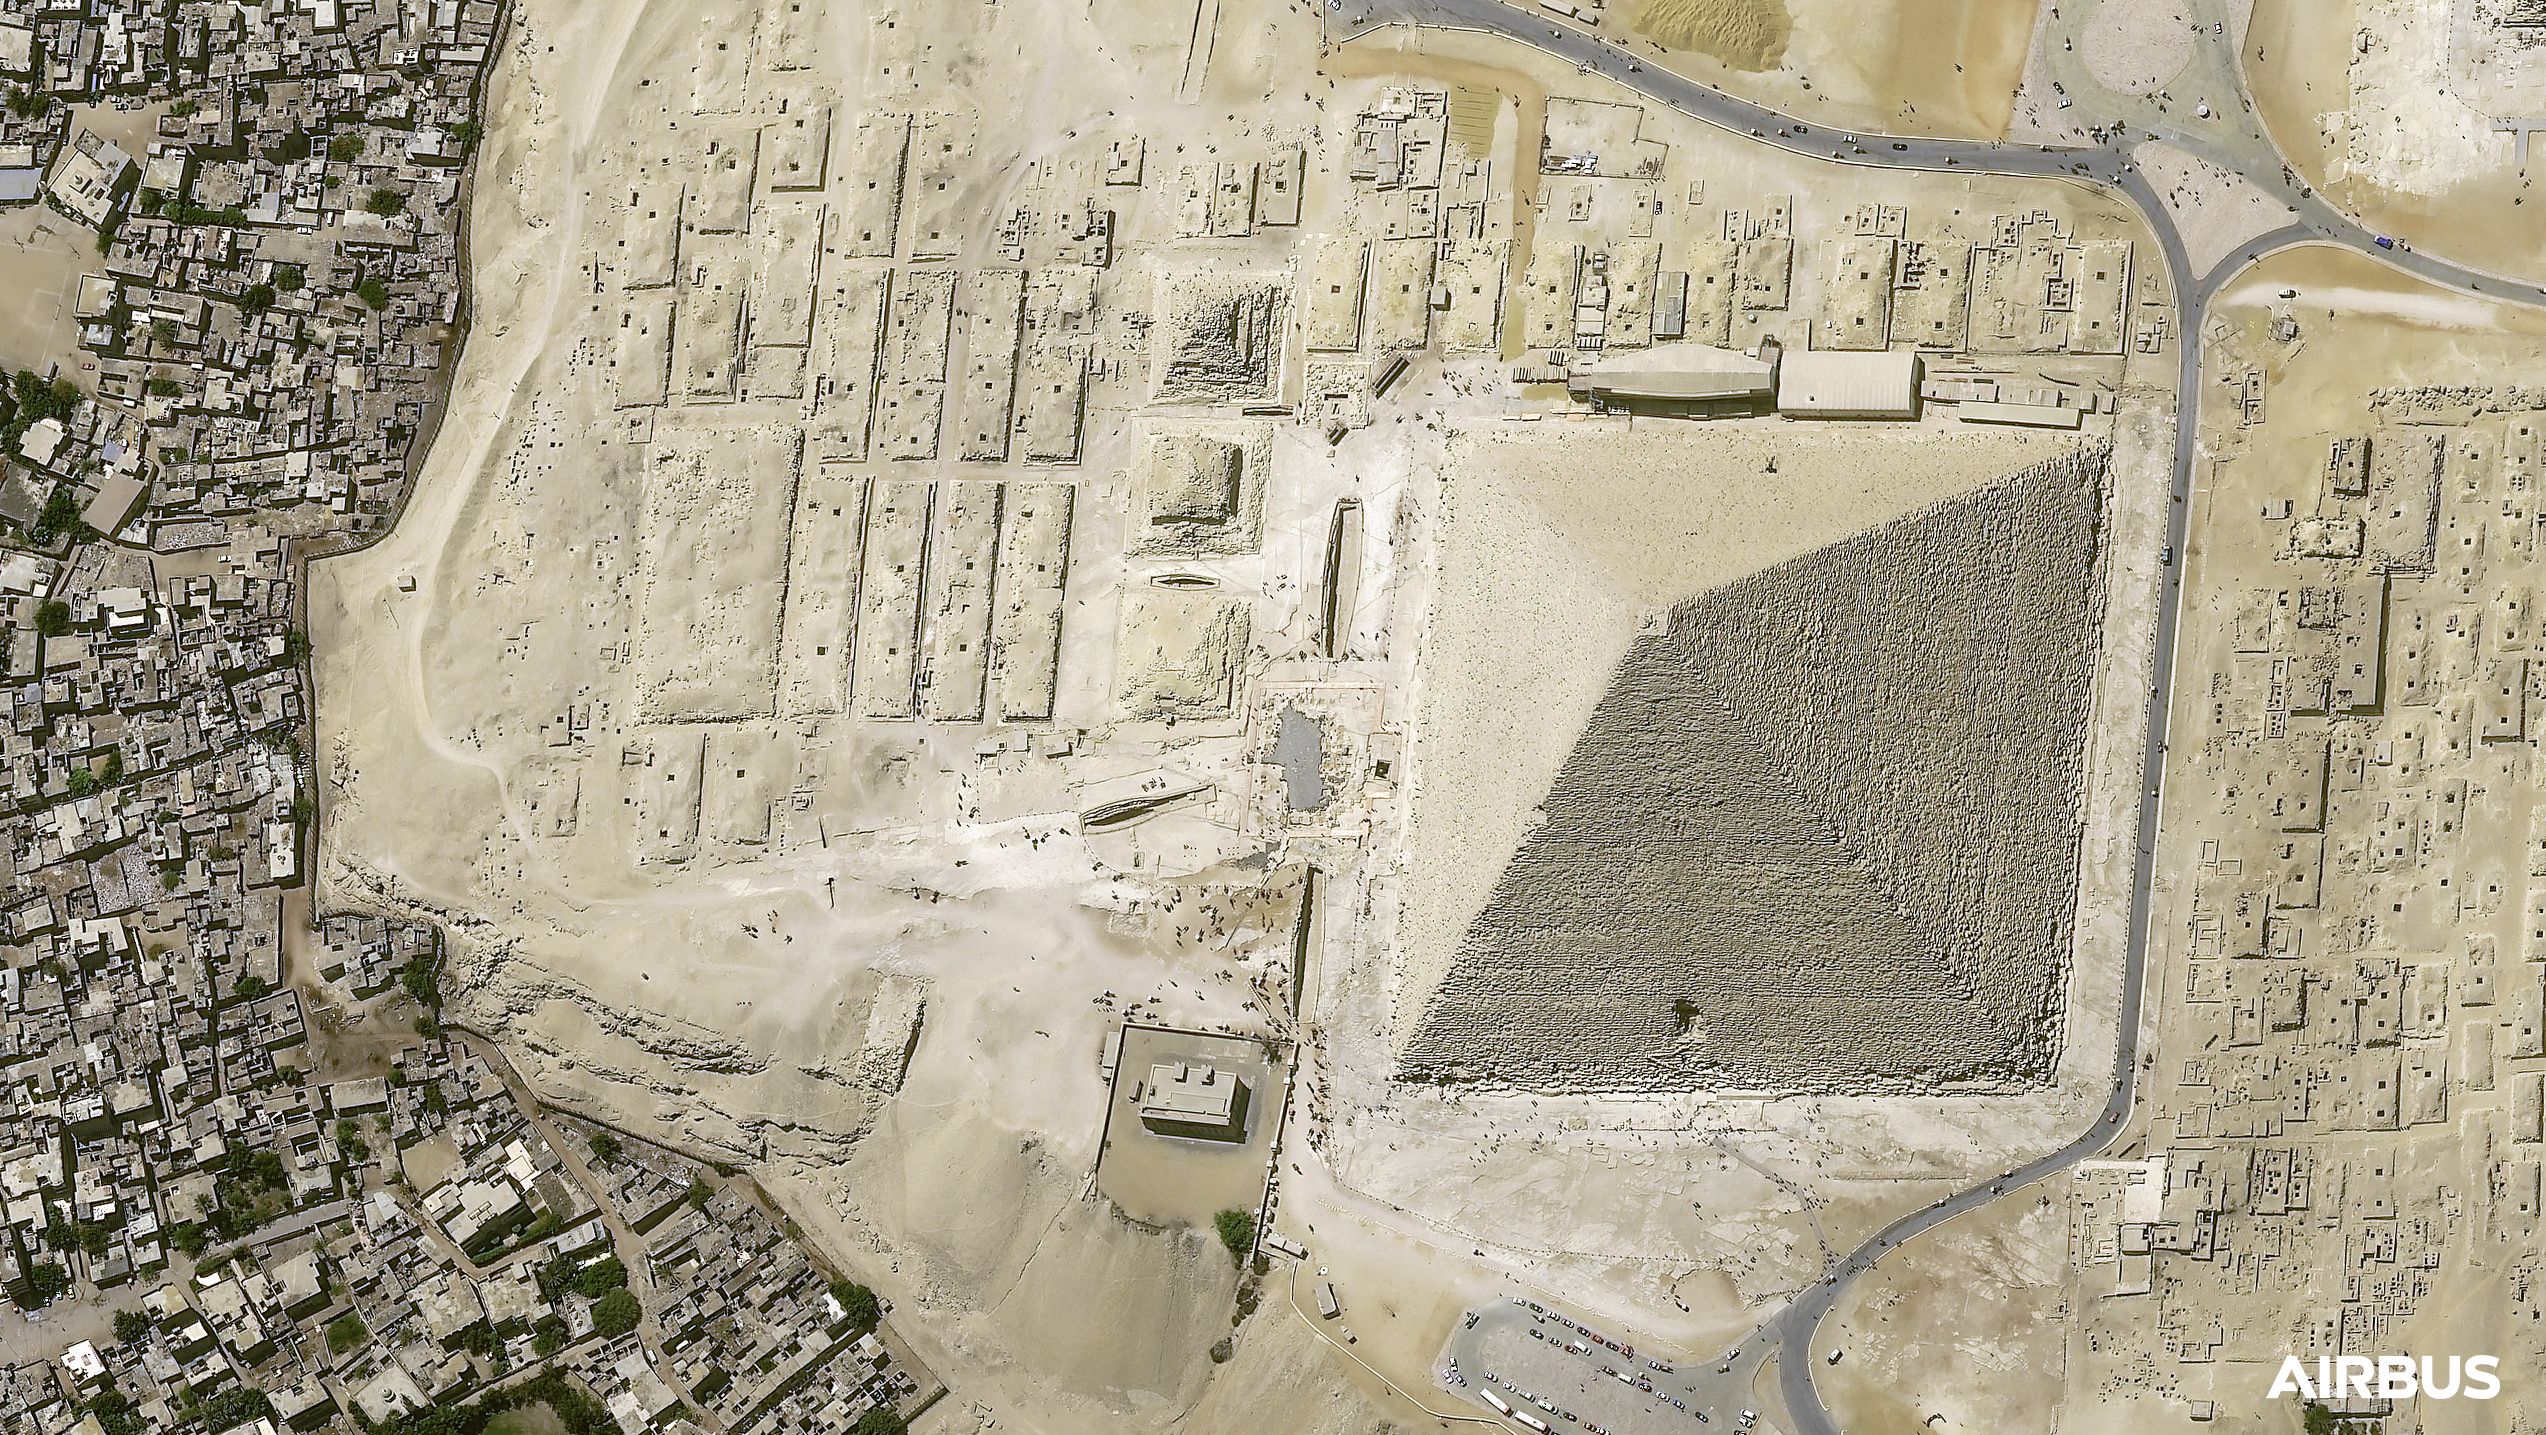 Cheops Pyramid, Cairo, Egypt, at 30cm native resolution, by Pléiades Neo 3 satellite. Click to enlarge.